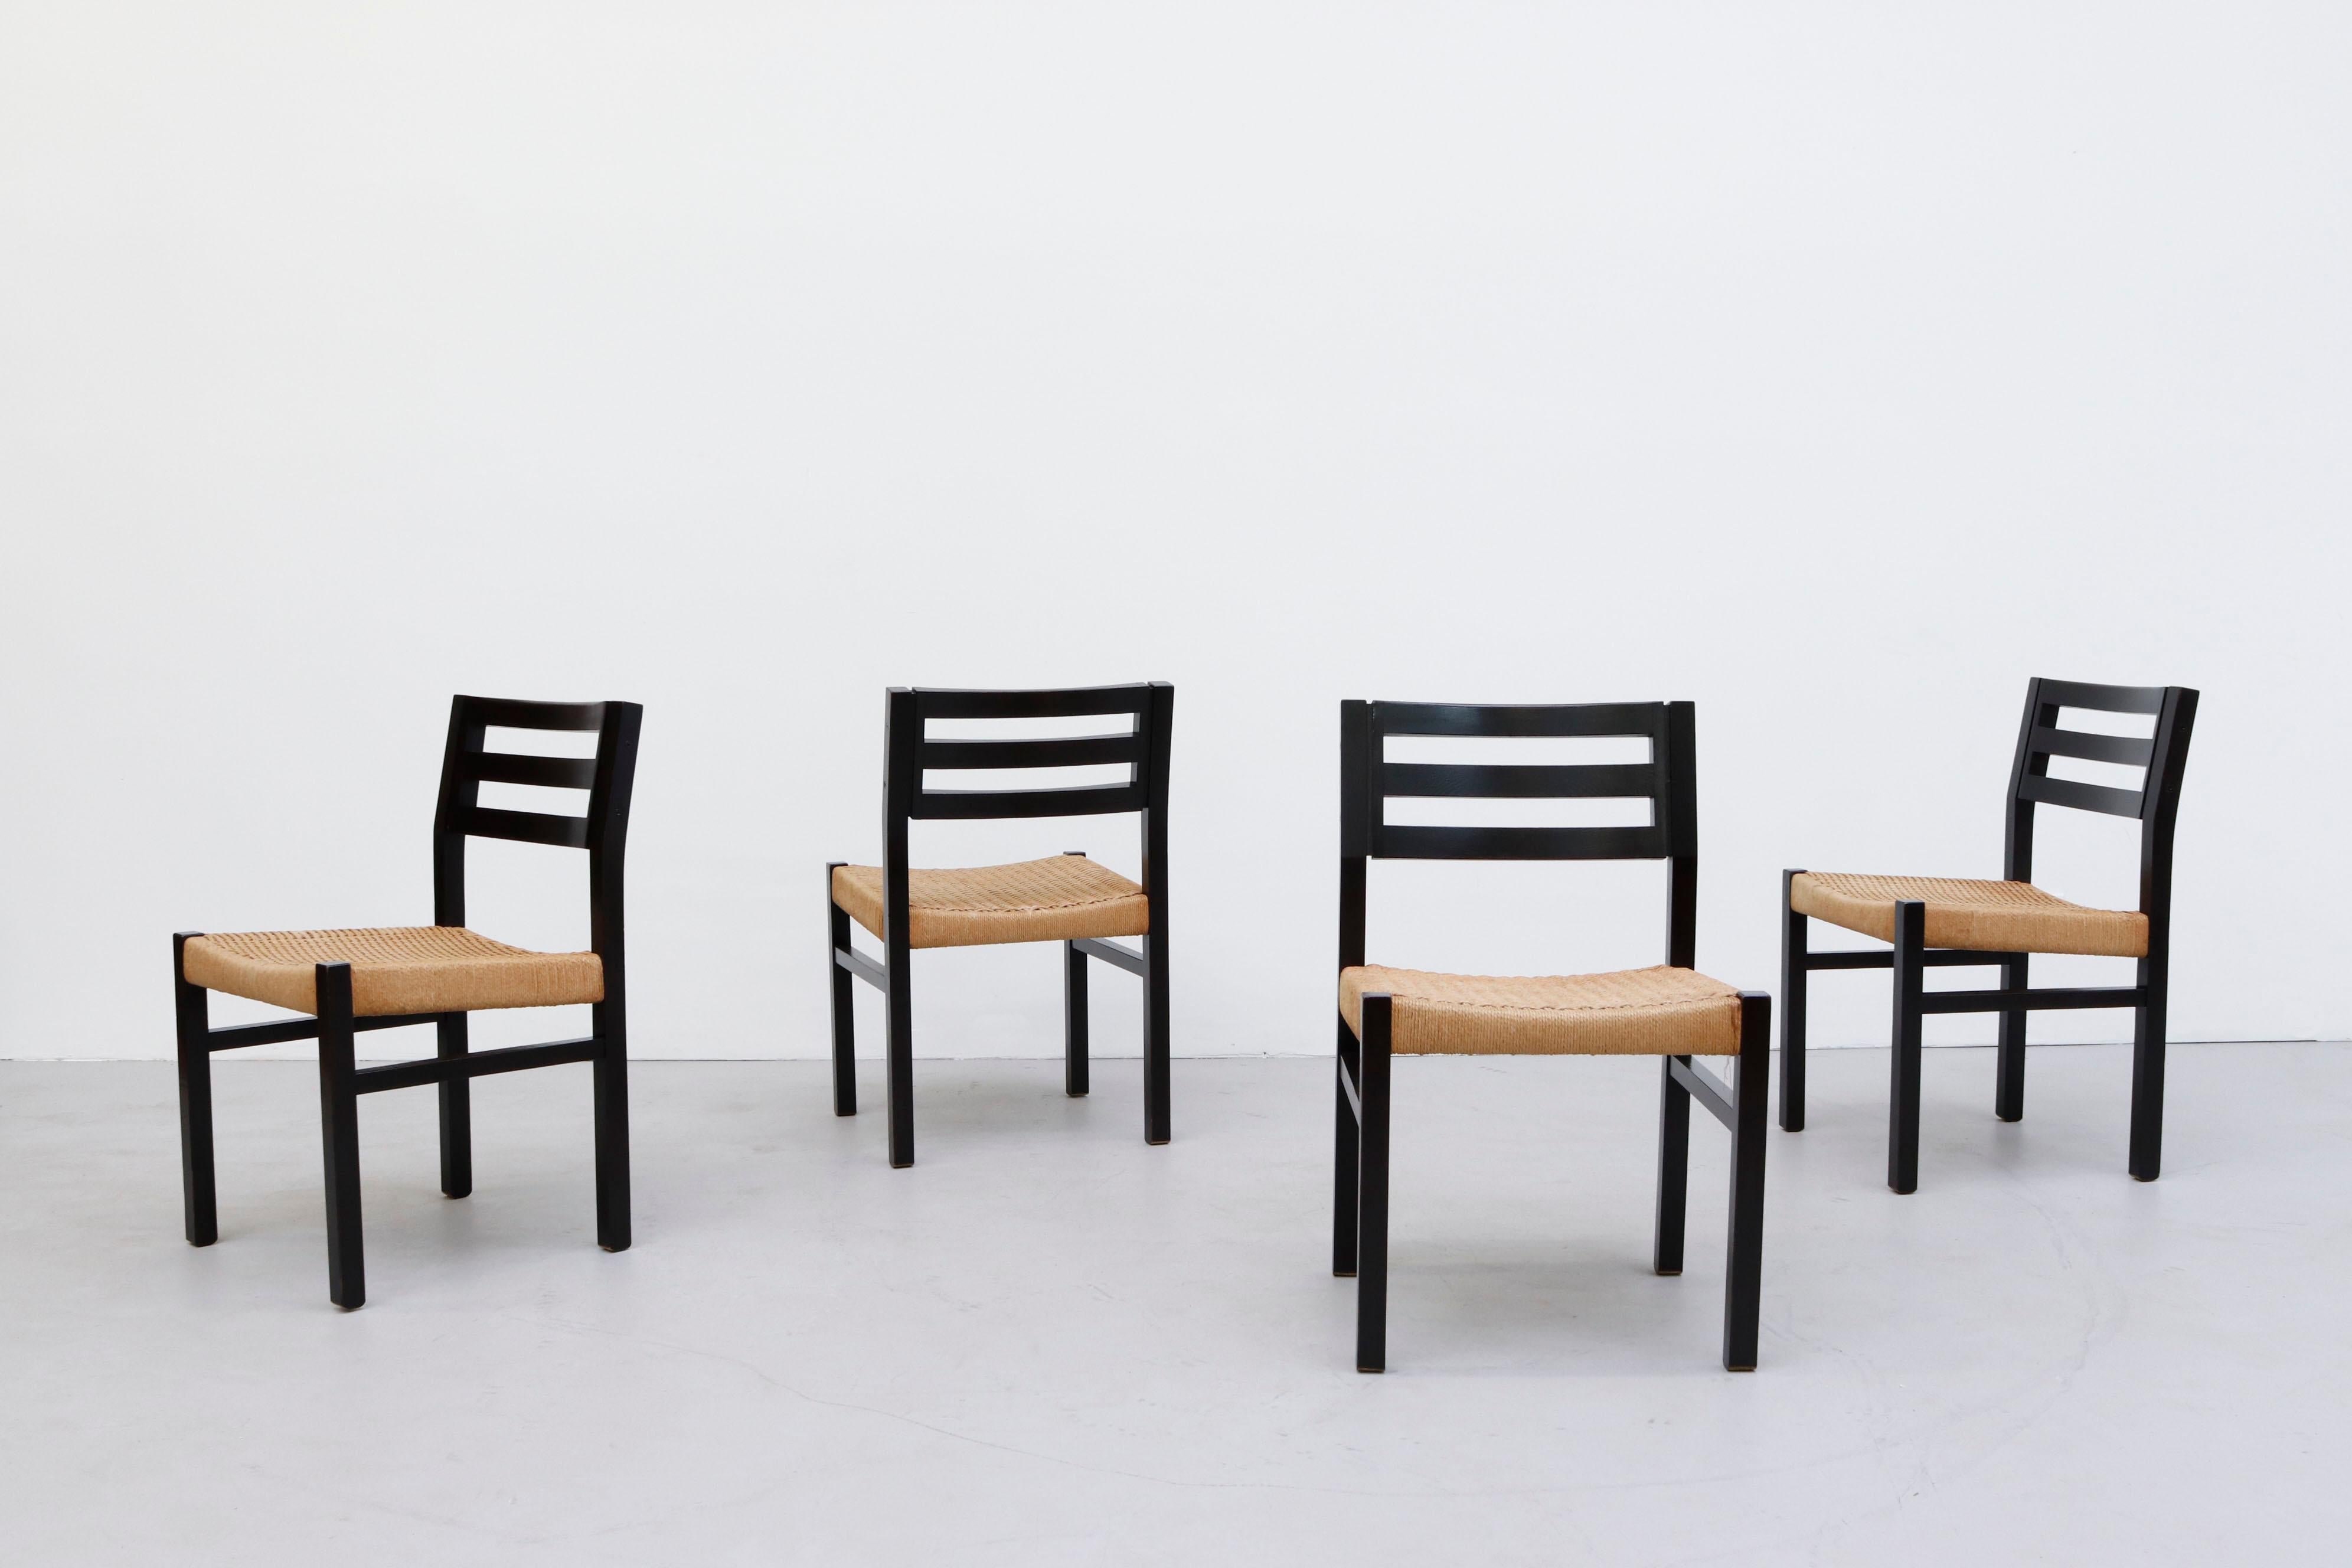 Set of 4 Niels Moller Dining Chairs with Black Stained Oak Frames and Woven Paper Cord Seats. Lightly Refinished with Some Visible Frame Wear and Discoloration to Seat. Set Price.